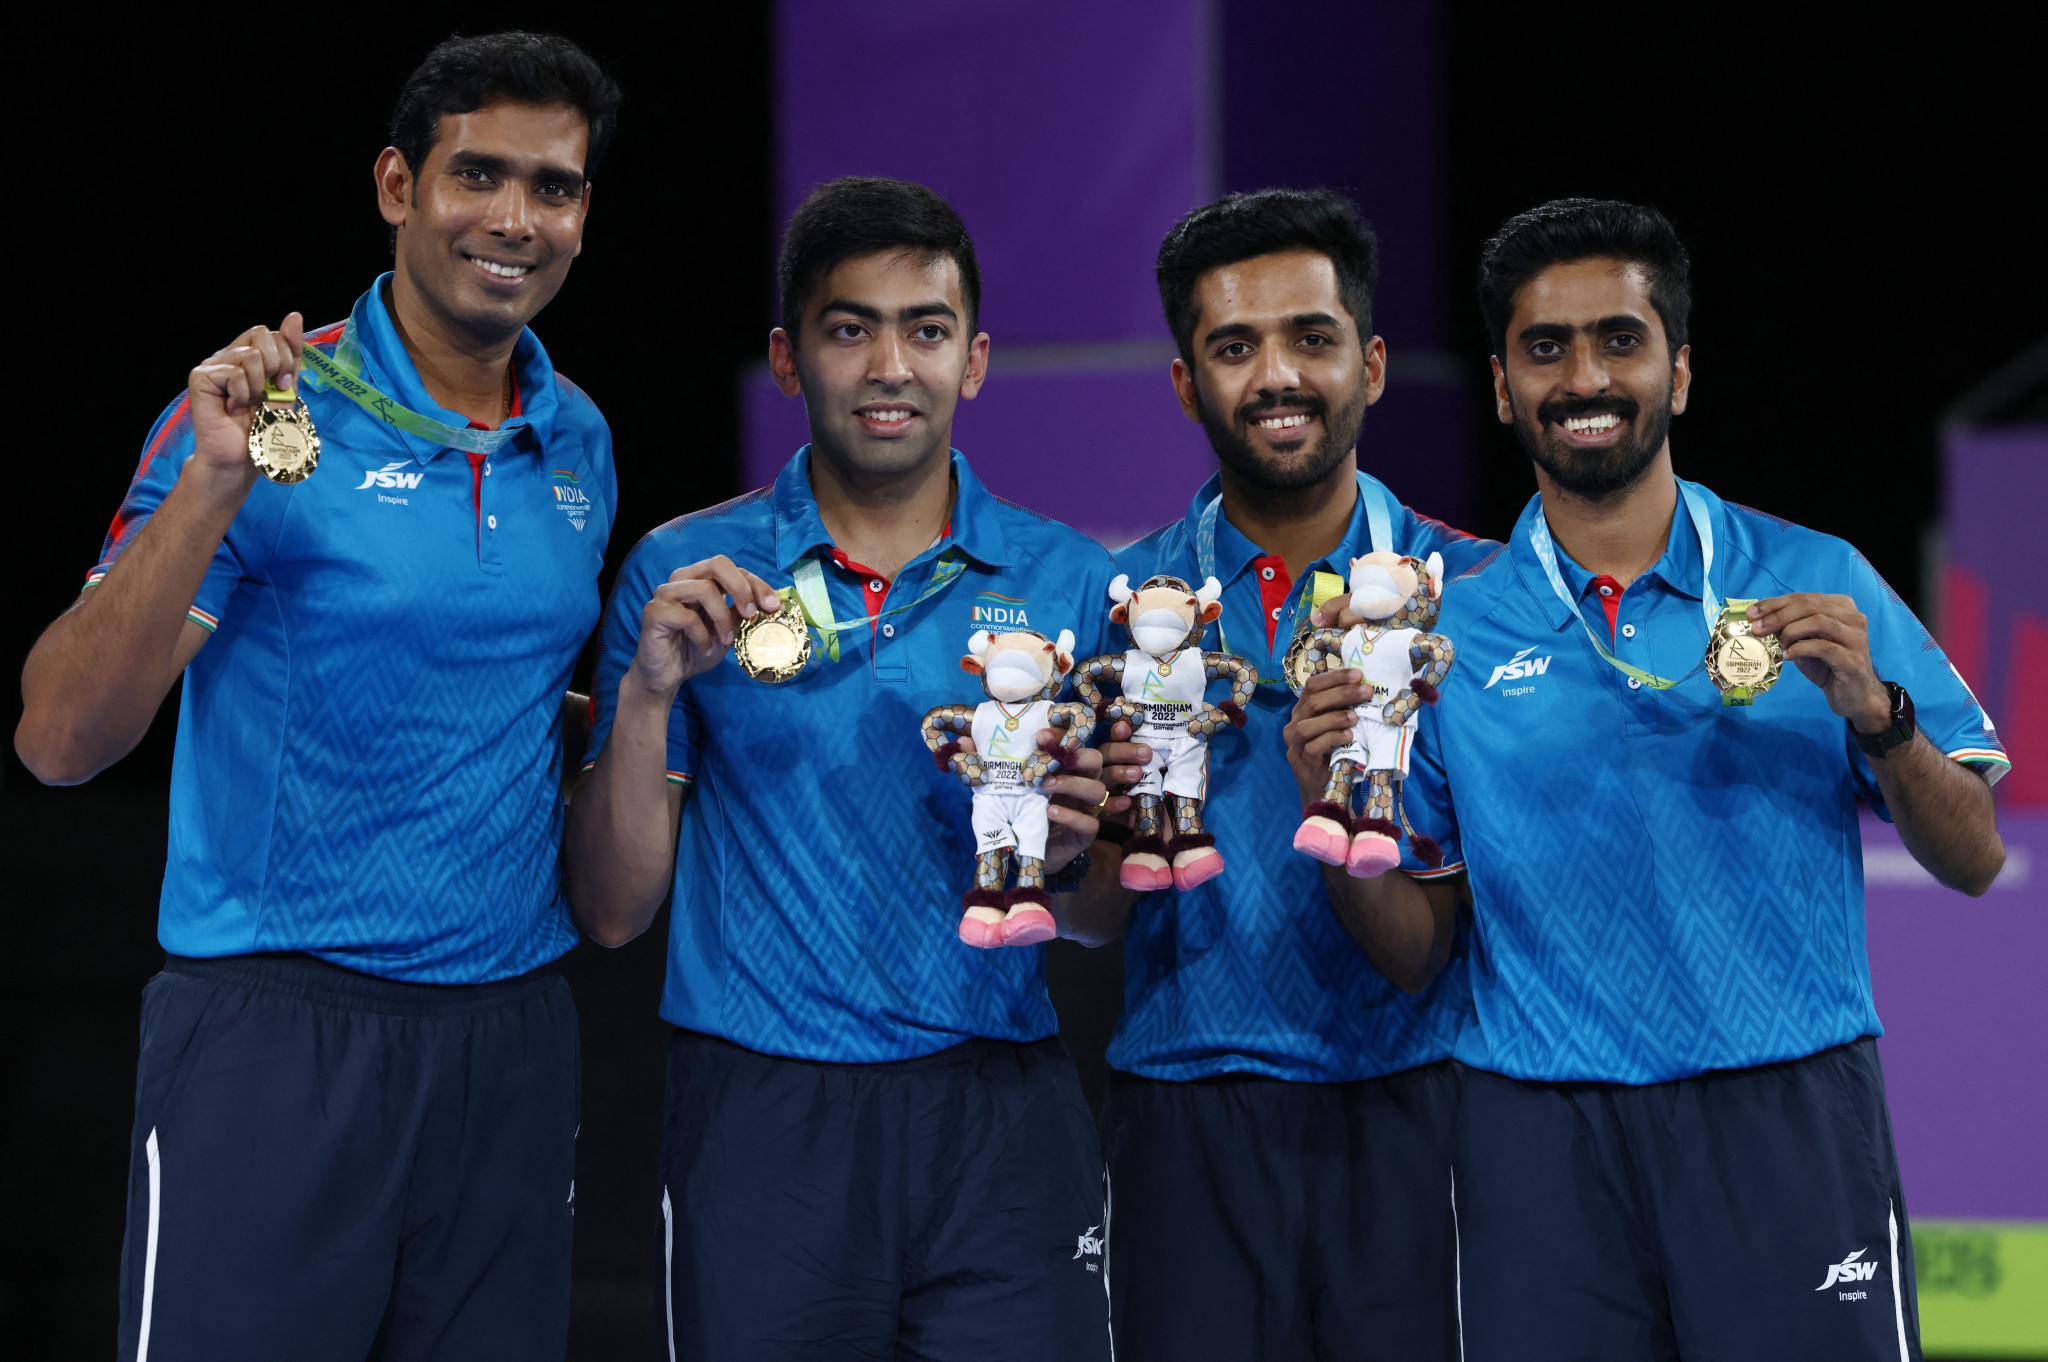 Sharath Kamal Achanta, left, won the Dhyan Chand Award after an impressive Birmingham 2022, which included winning men's team gold alongside Shetty, second from right ©Getty Images